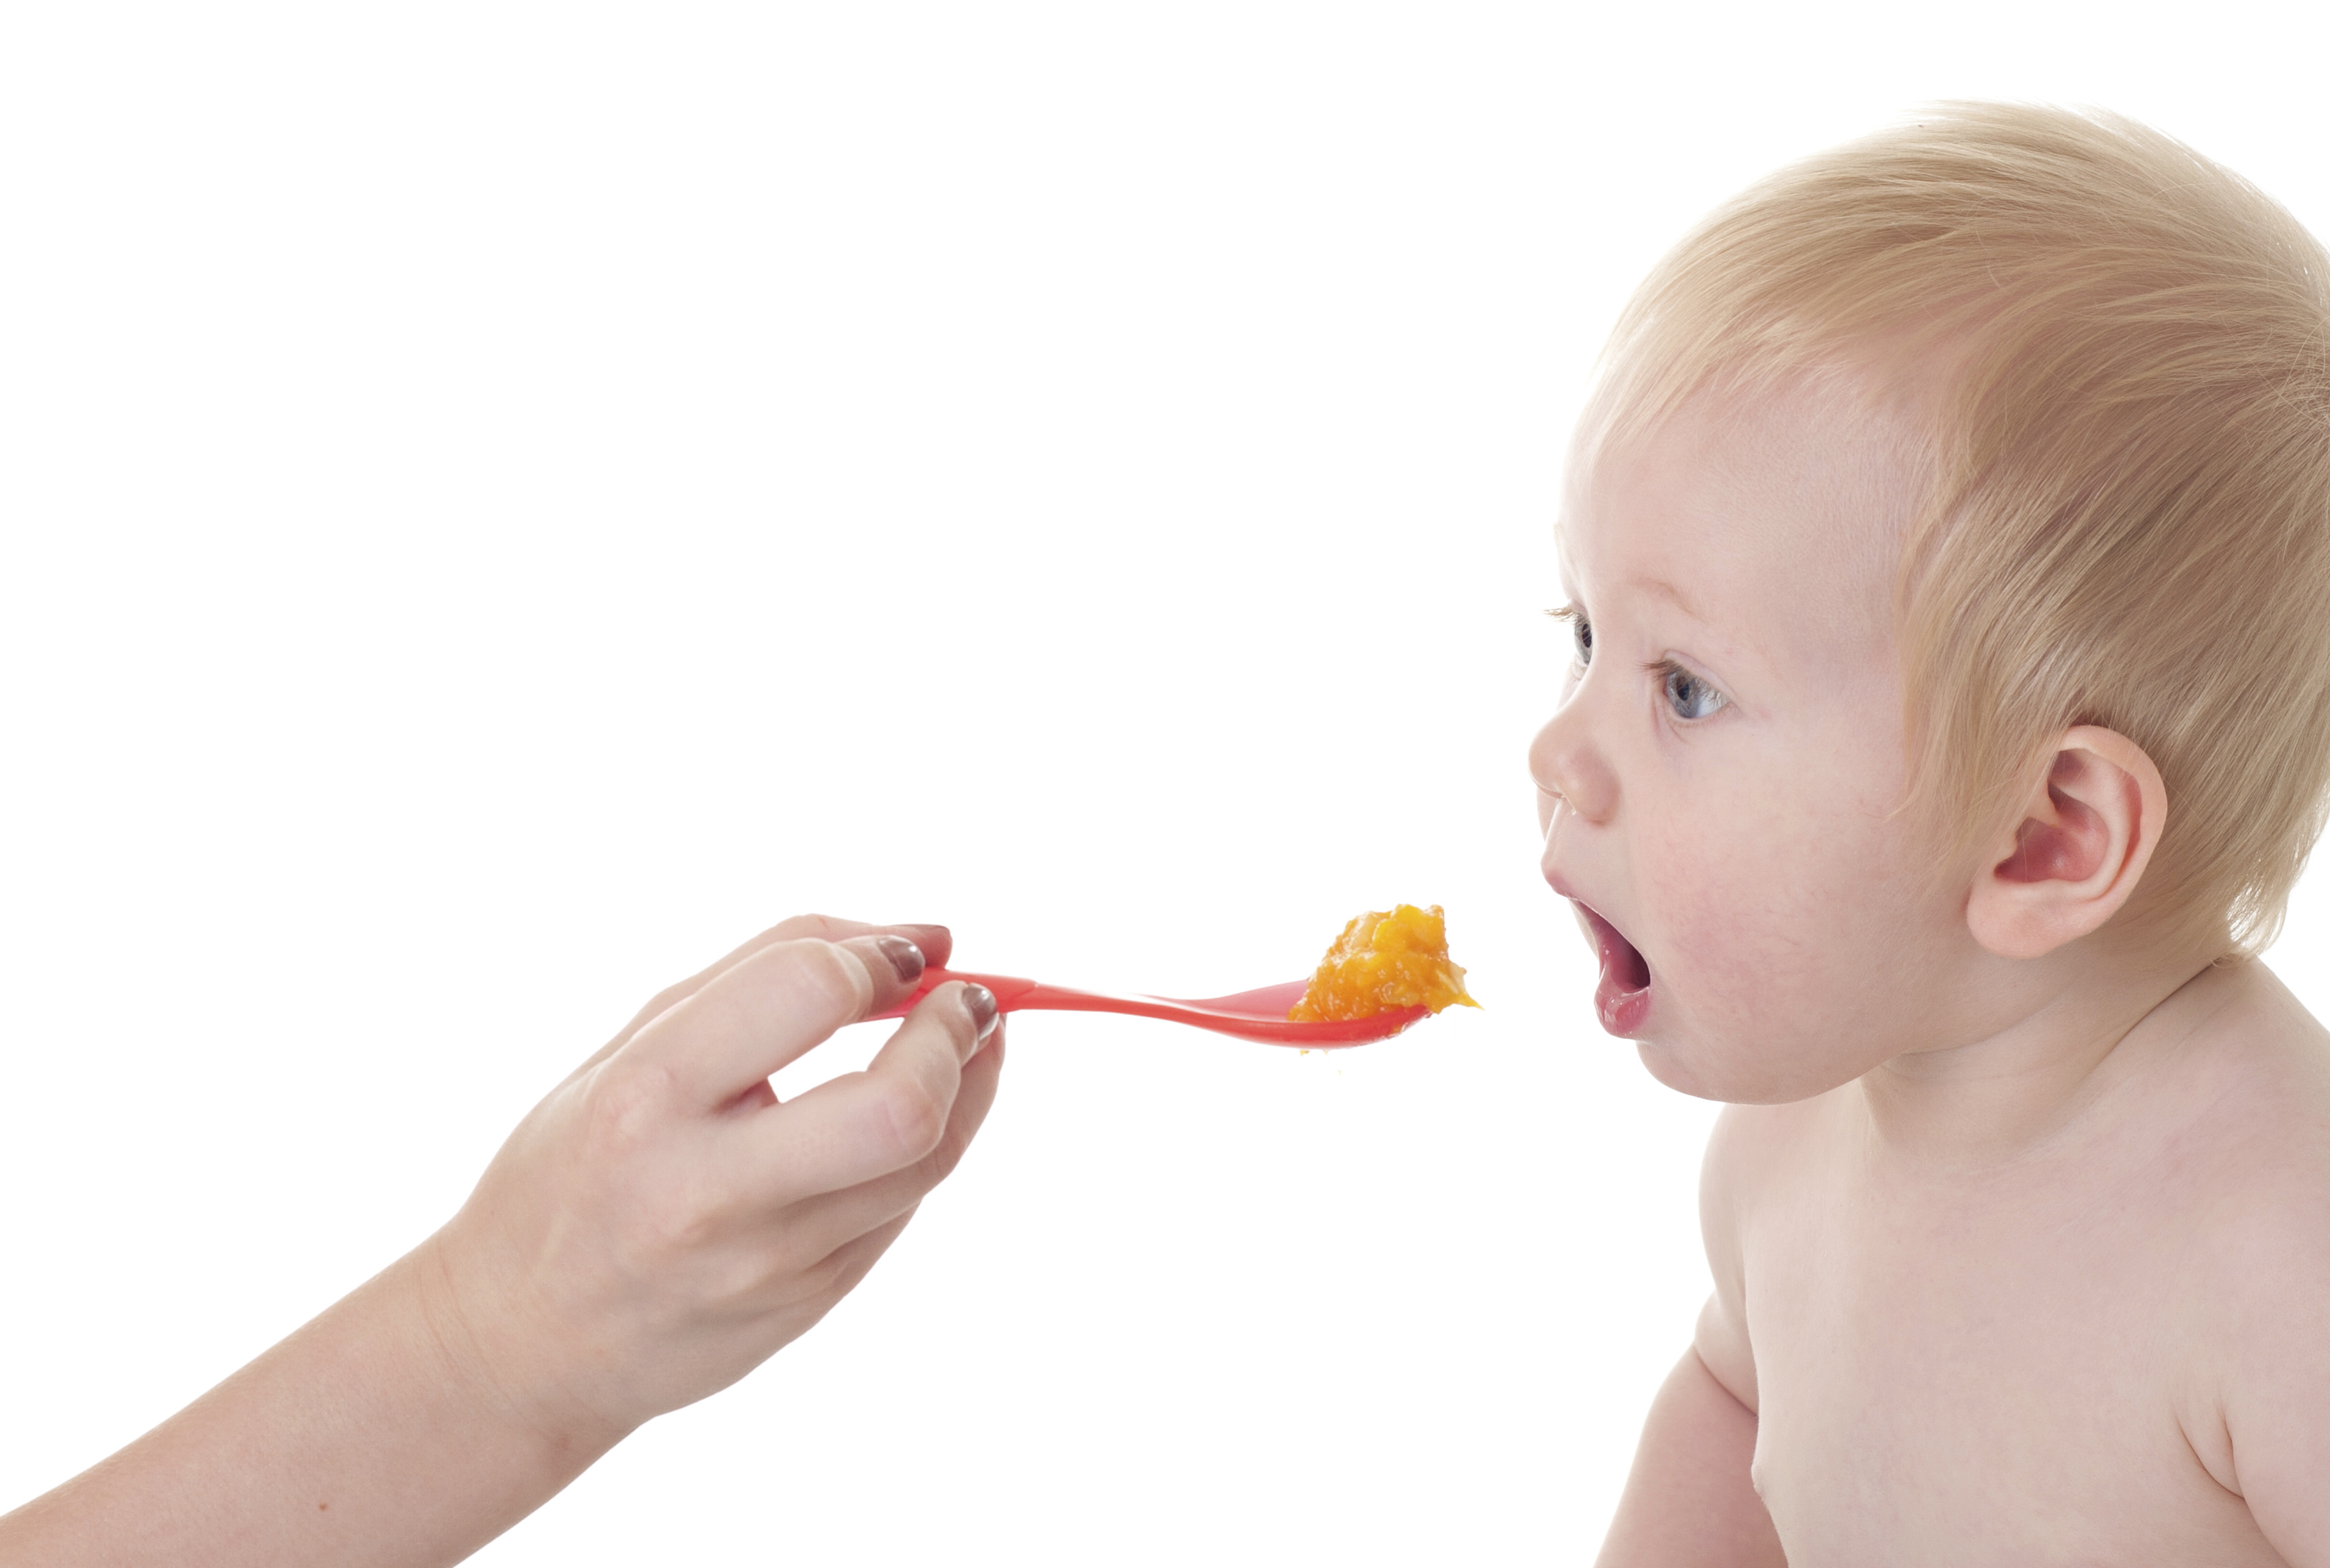 Baby willingly eating from spoon offered by parent